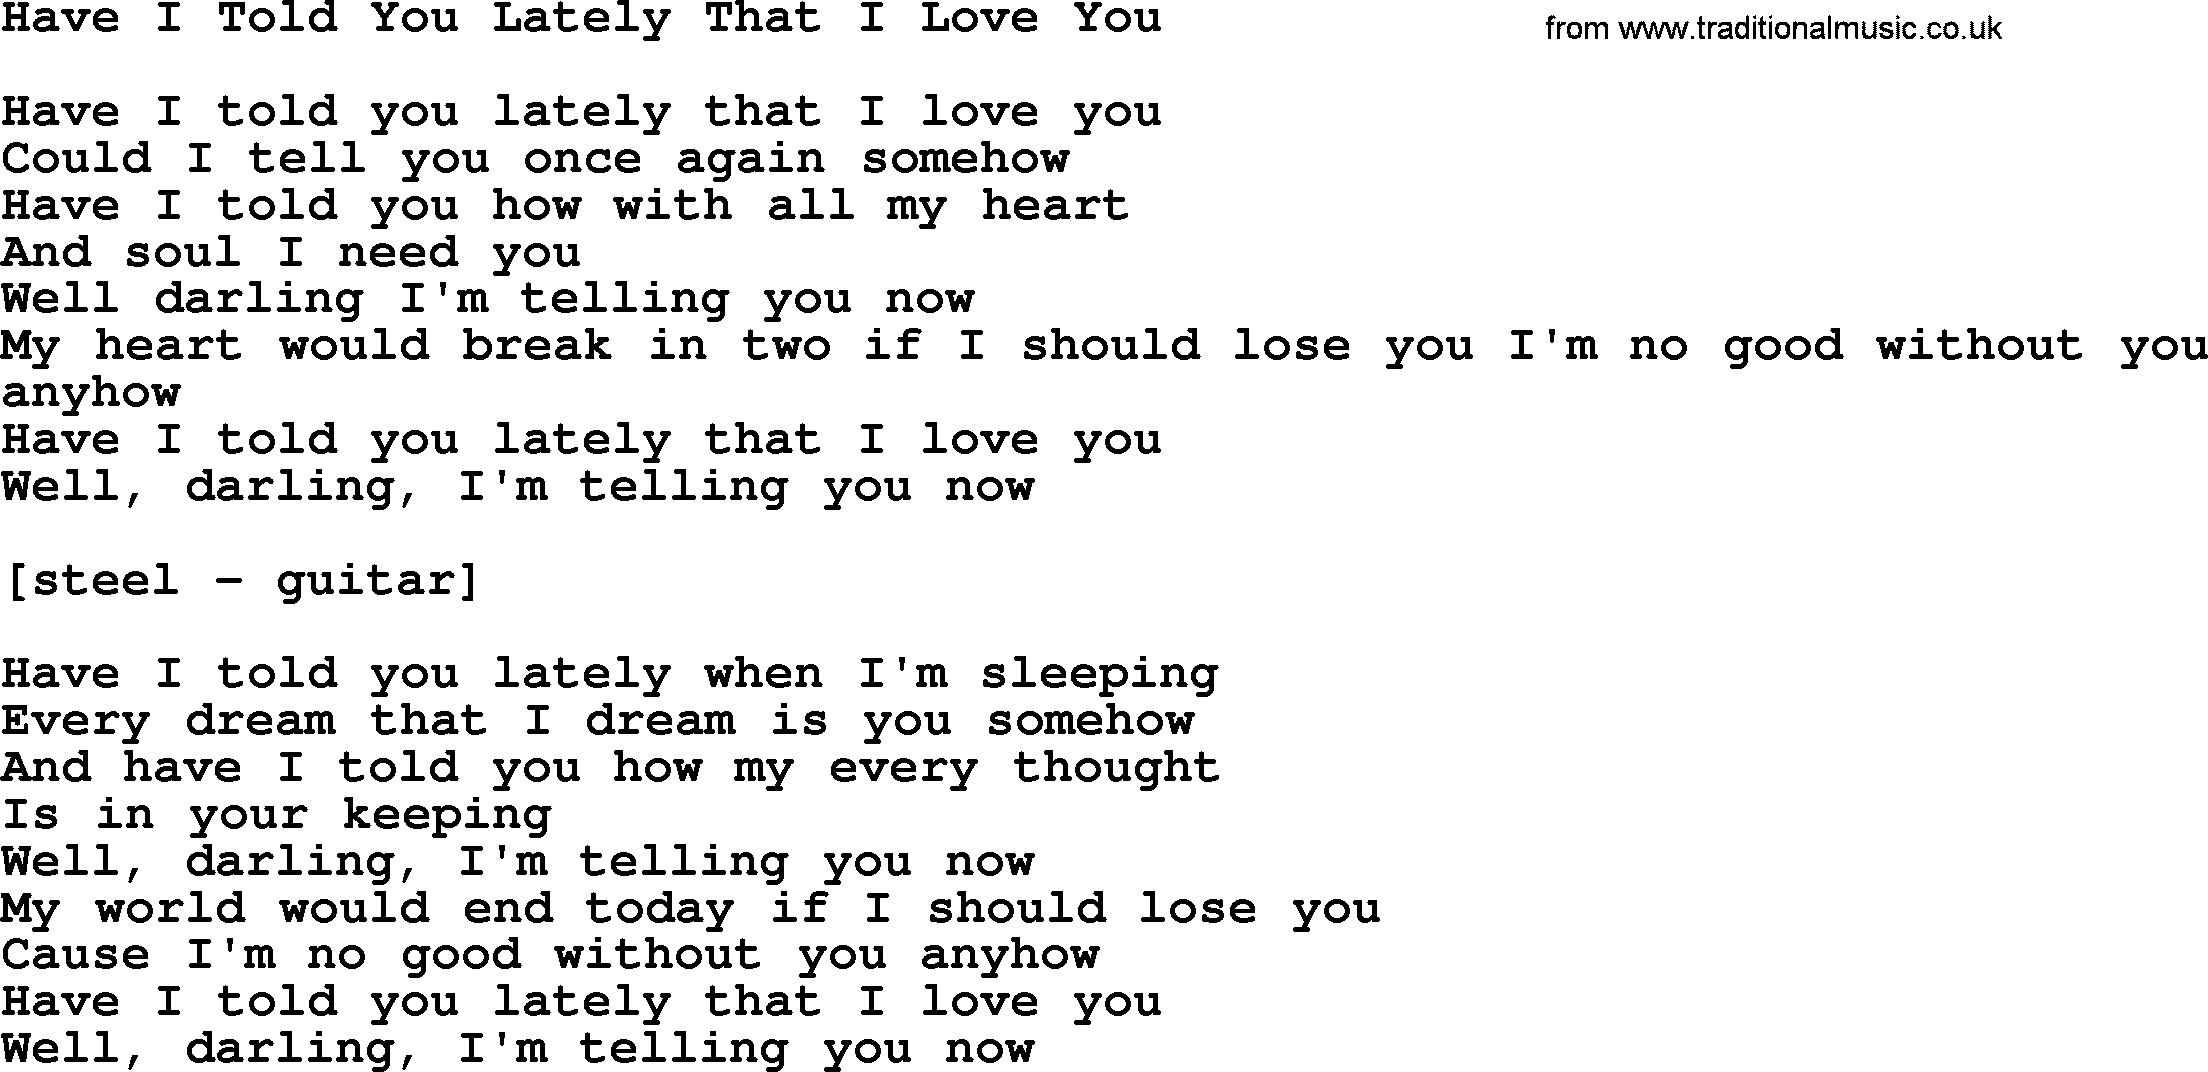 Willie Nelson song: Have I Told You Lately That I Love You lyrics